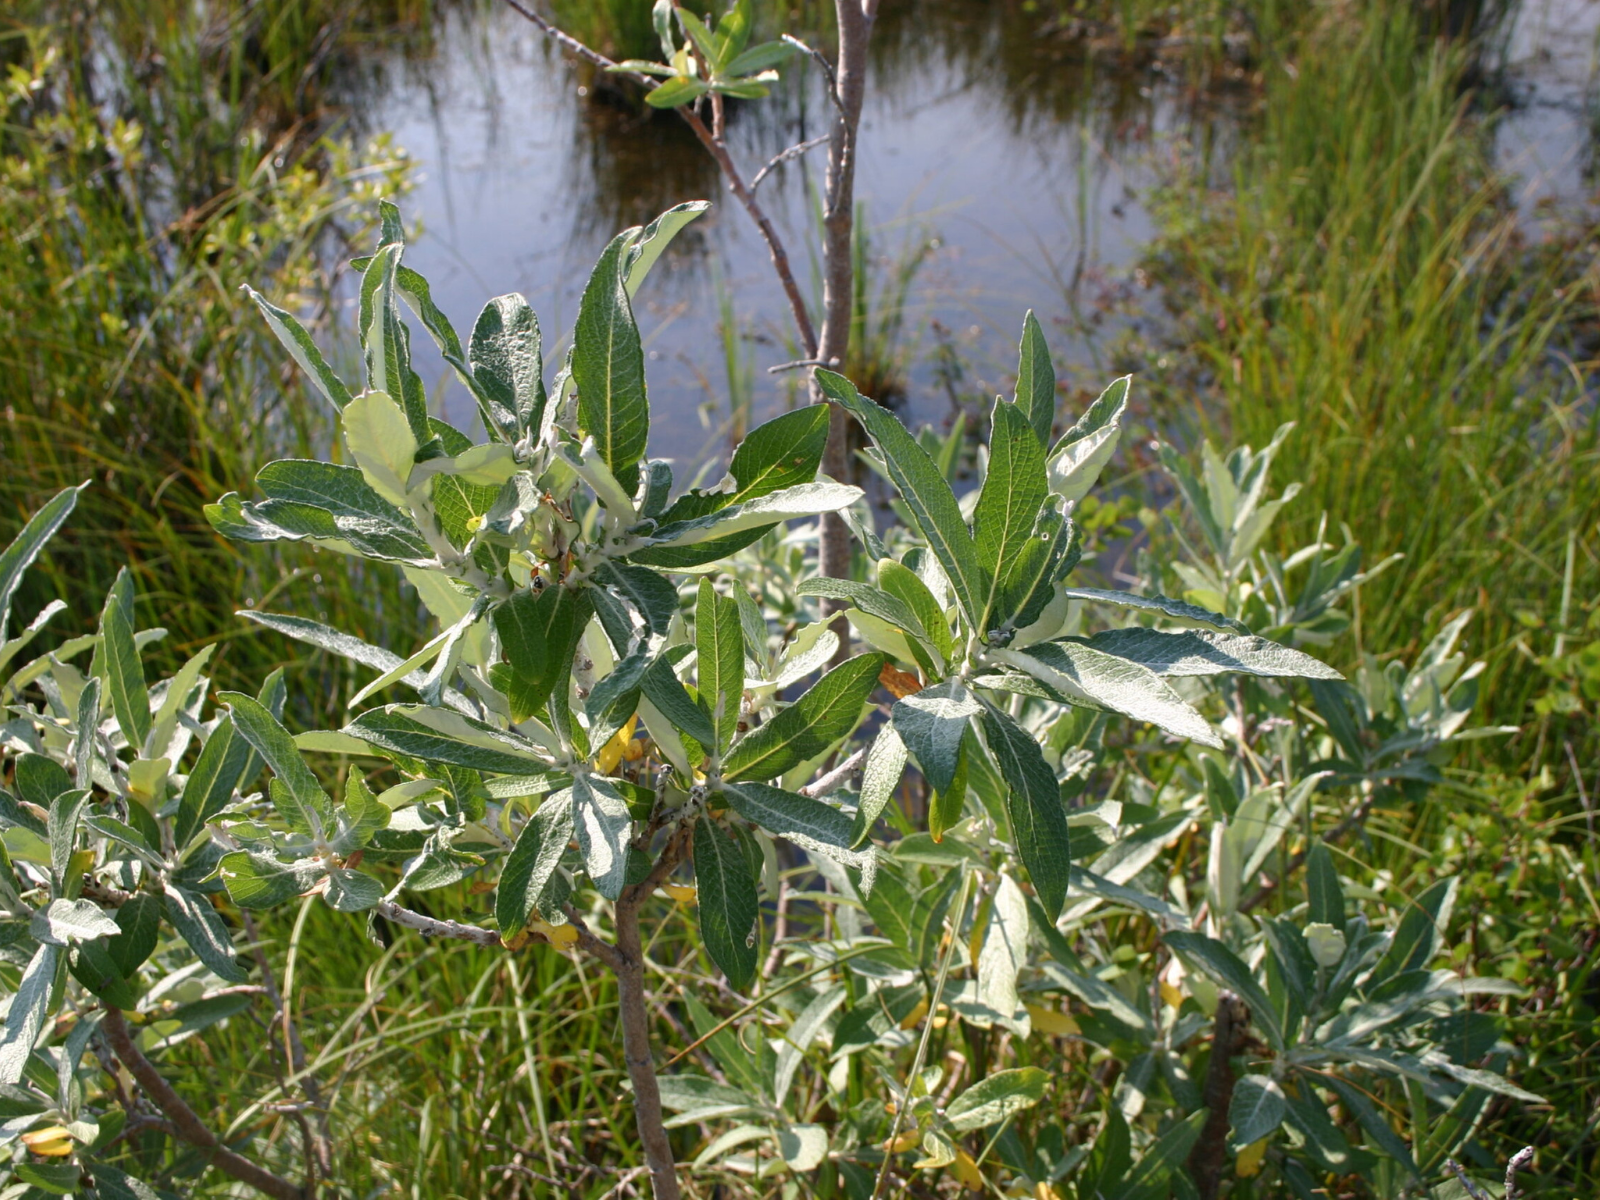 Close-up looking down at a shrub on a riverbank with long, thin silver-green leaves.